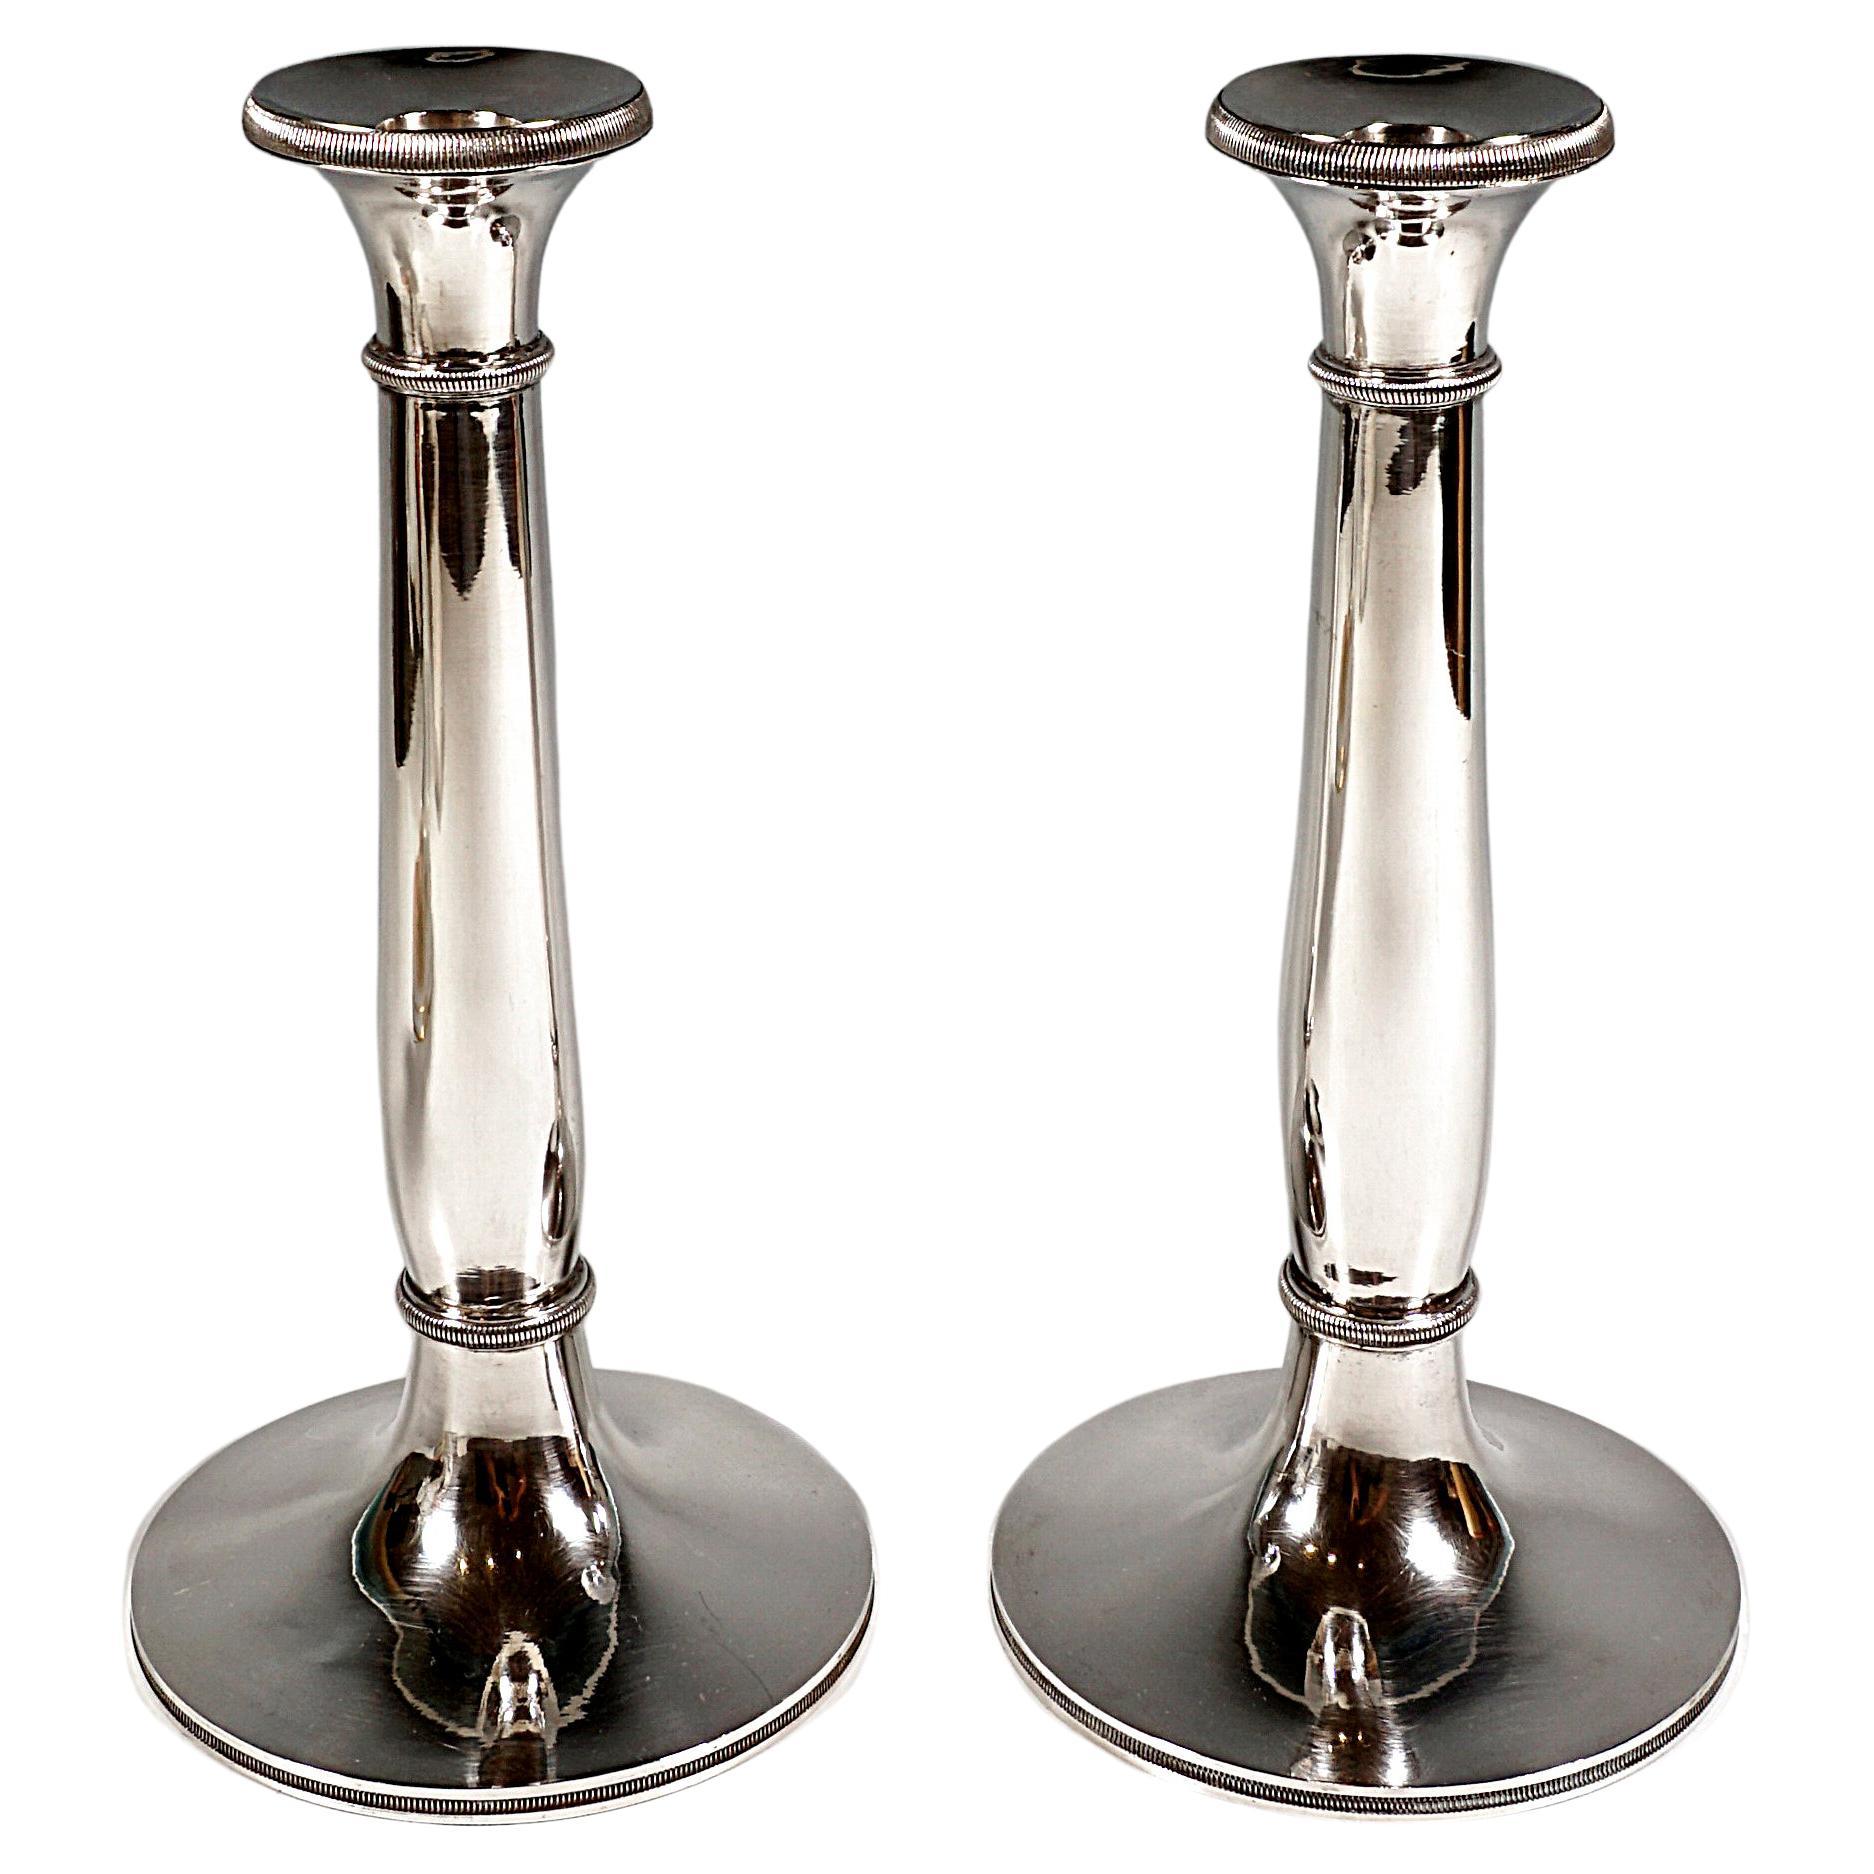 Pair Of Antique Wien Vienna Silver Candle Holders, by Leopold Kuhn, dated 1827